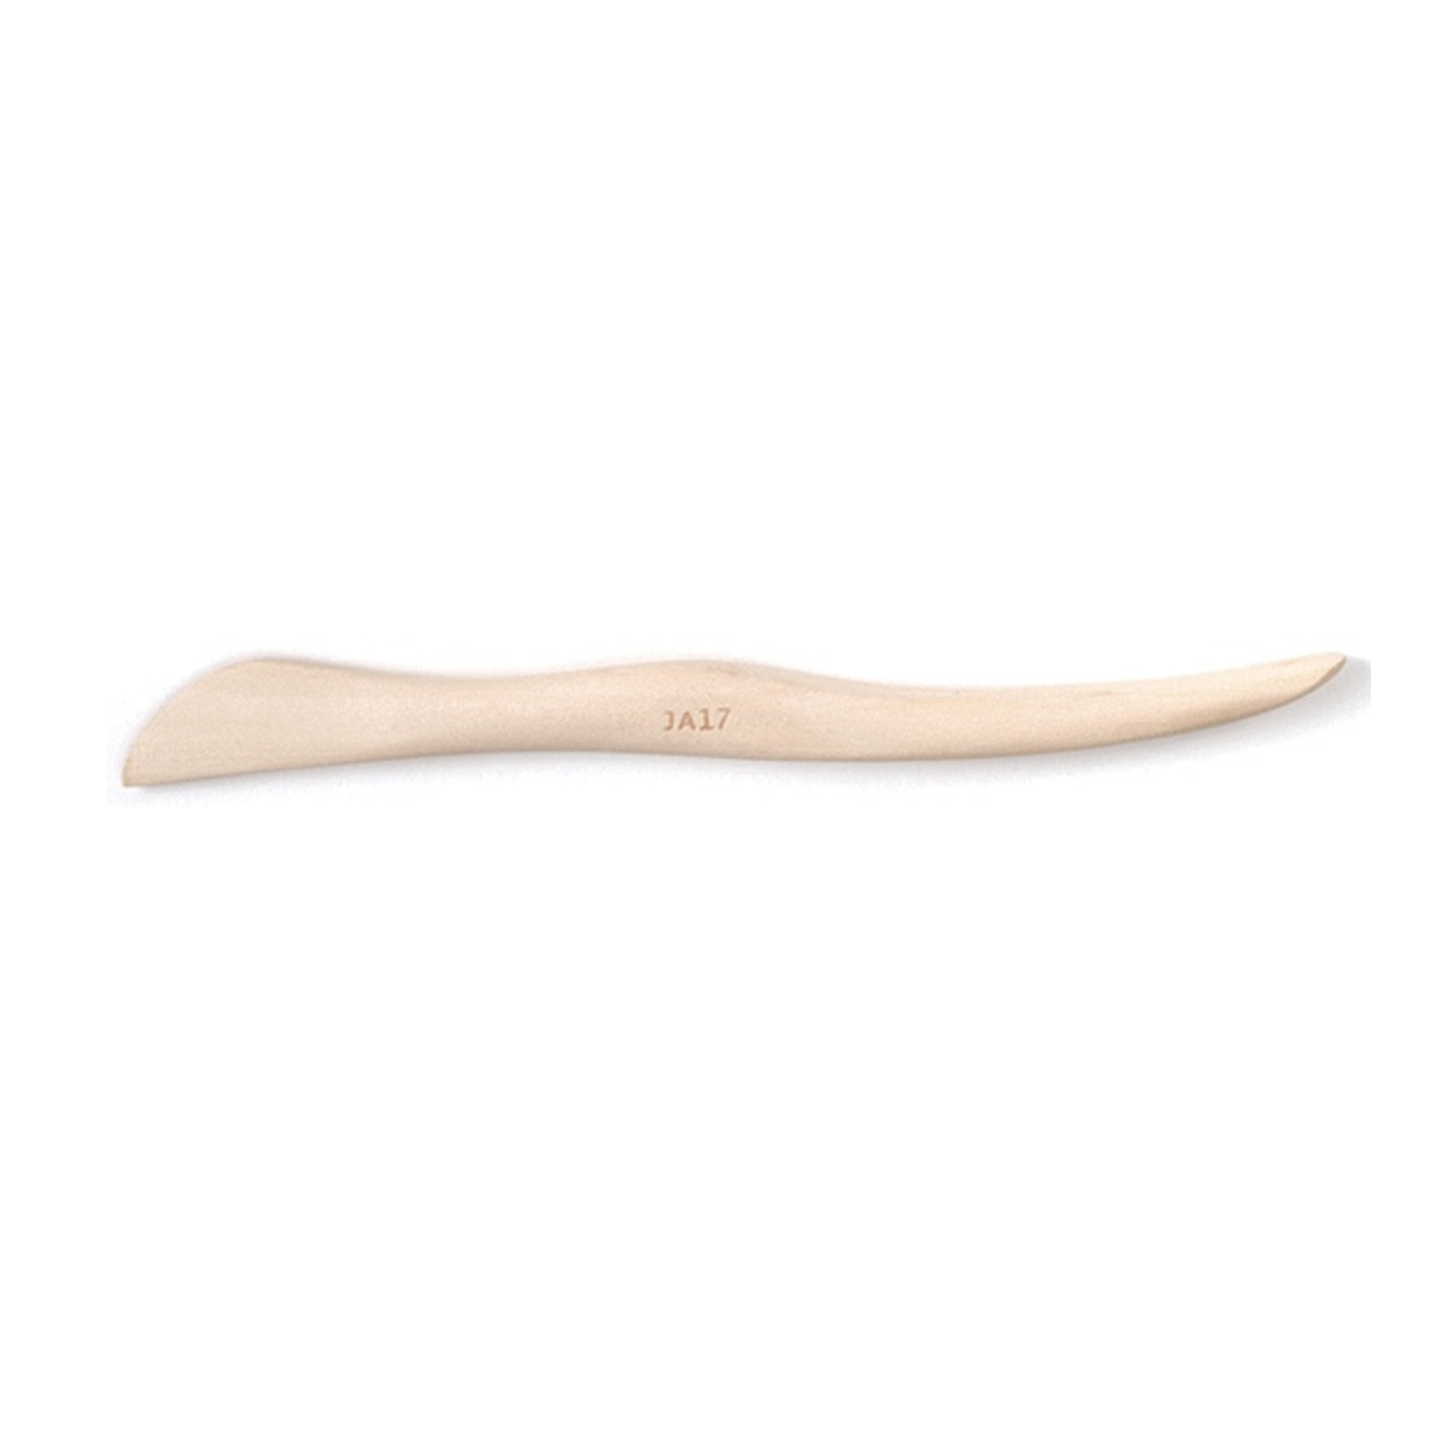 Wooden Modelling Tool